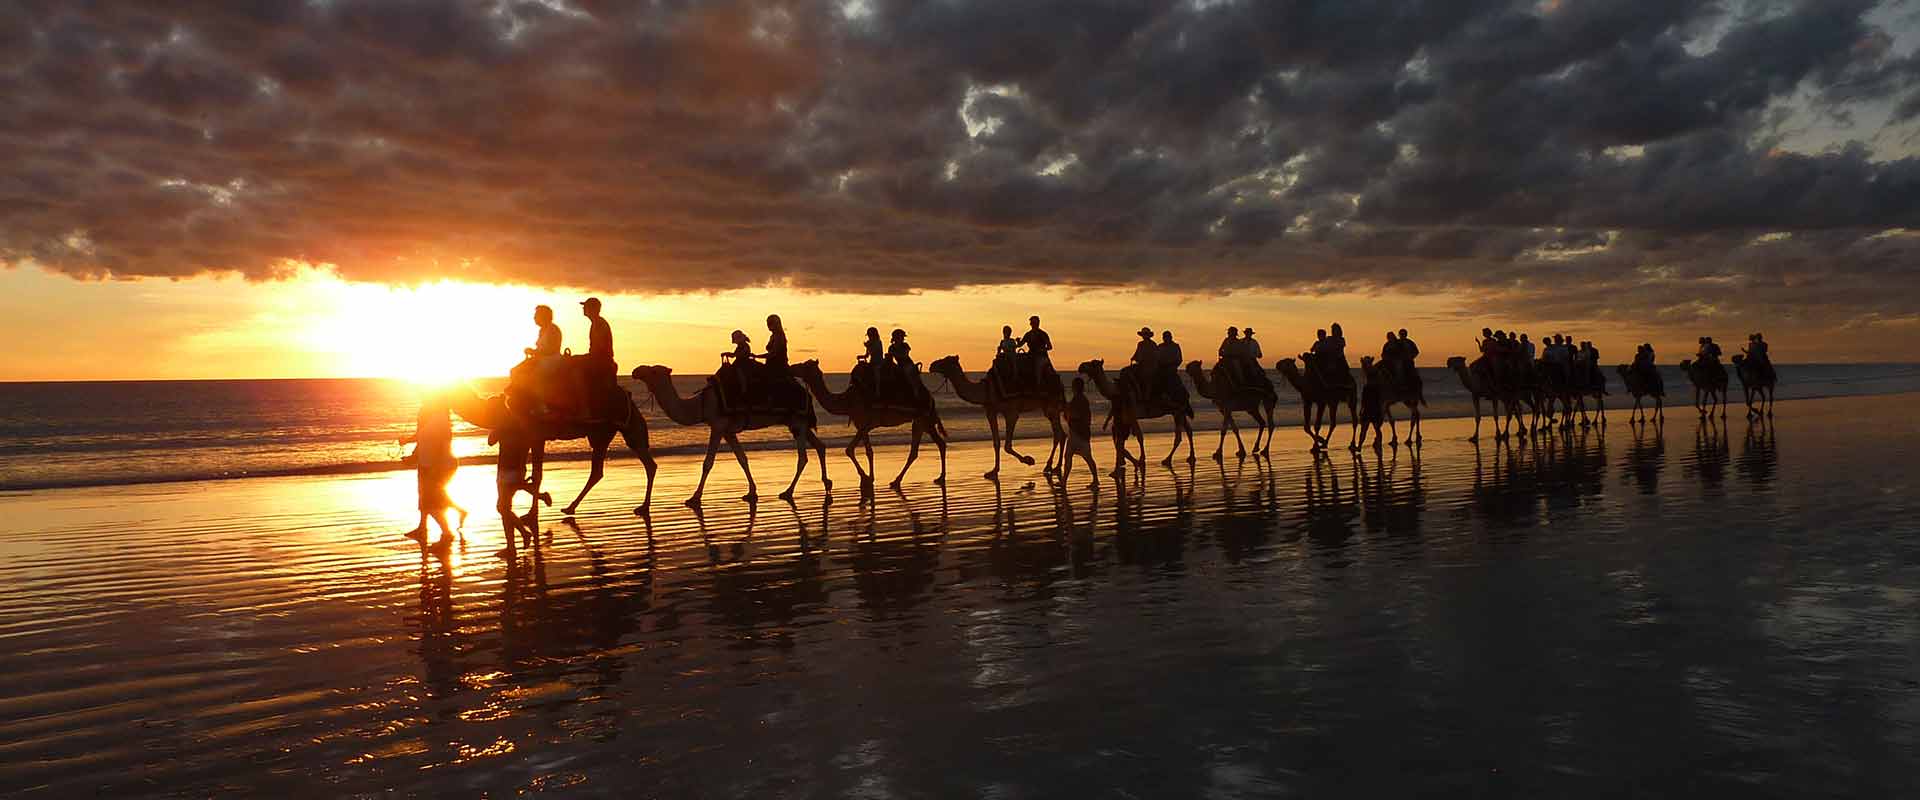 Line of camels taking tourists for a ride along the beach at sunset, WA